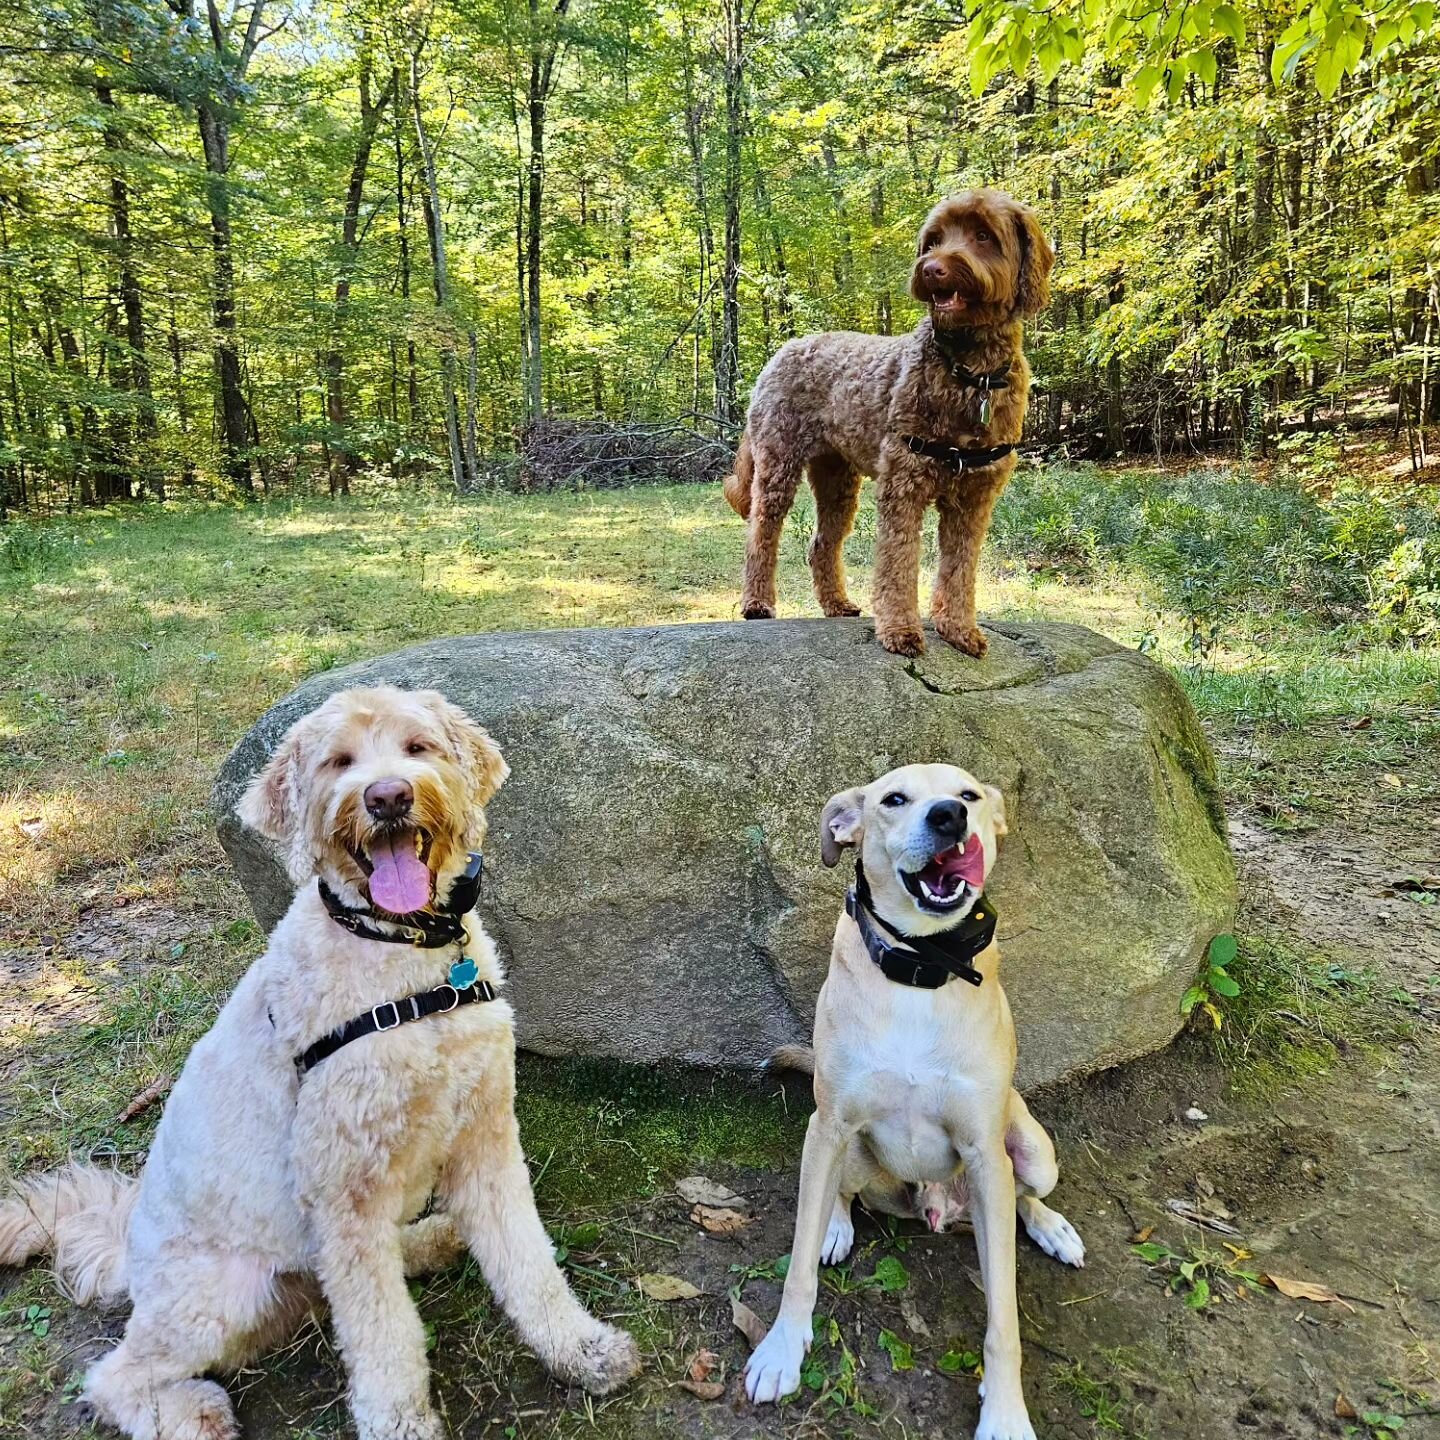 Big smiles from the best friends 
🧡🐶🧡
Featuring Scout, Bode &amp; Bailey
.
.
.
.
.
.
.
.
#dogsmiles #october #dogtober